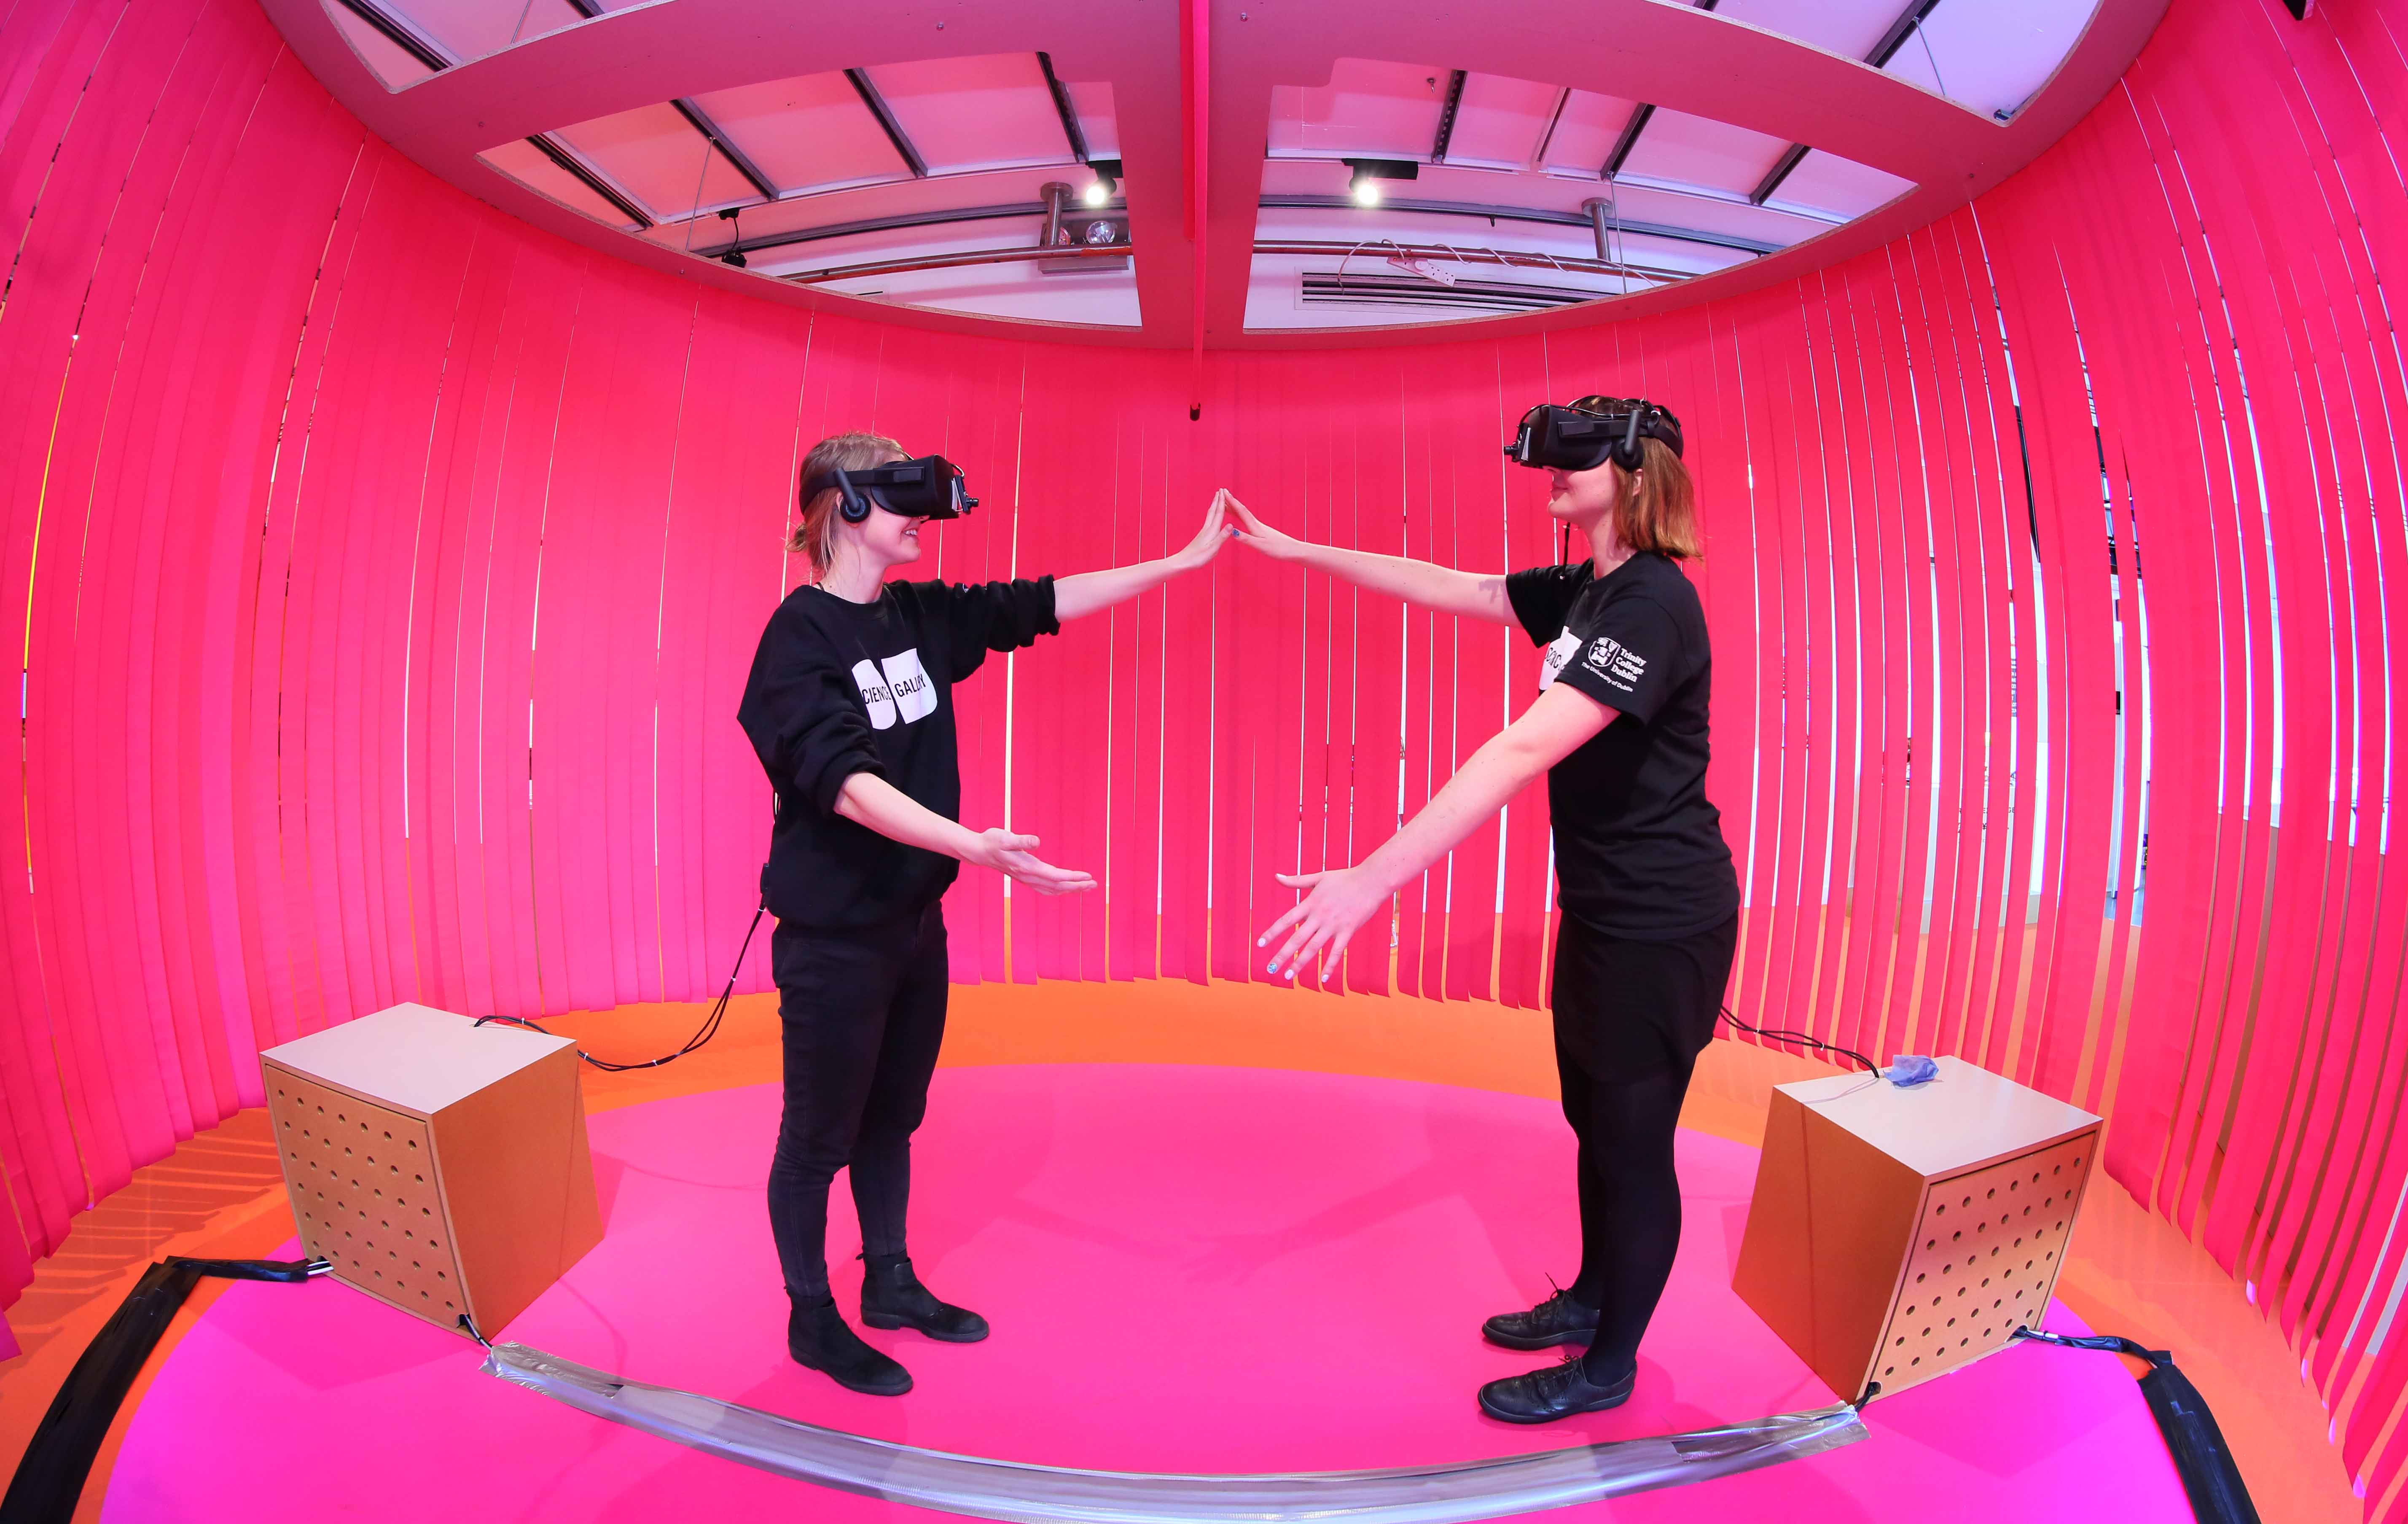 Another INTIMACY exhibition, Machine to Be Another by BeAnother Lab, uses virtual reality technology to allow the visitors to each fully experience the world from the perspective of the other, pushing the limits of empathy and embodiment. 